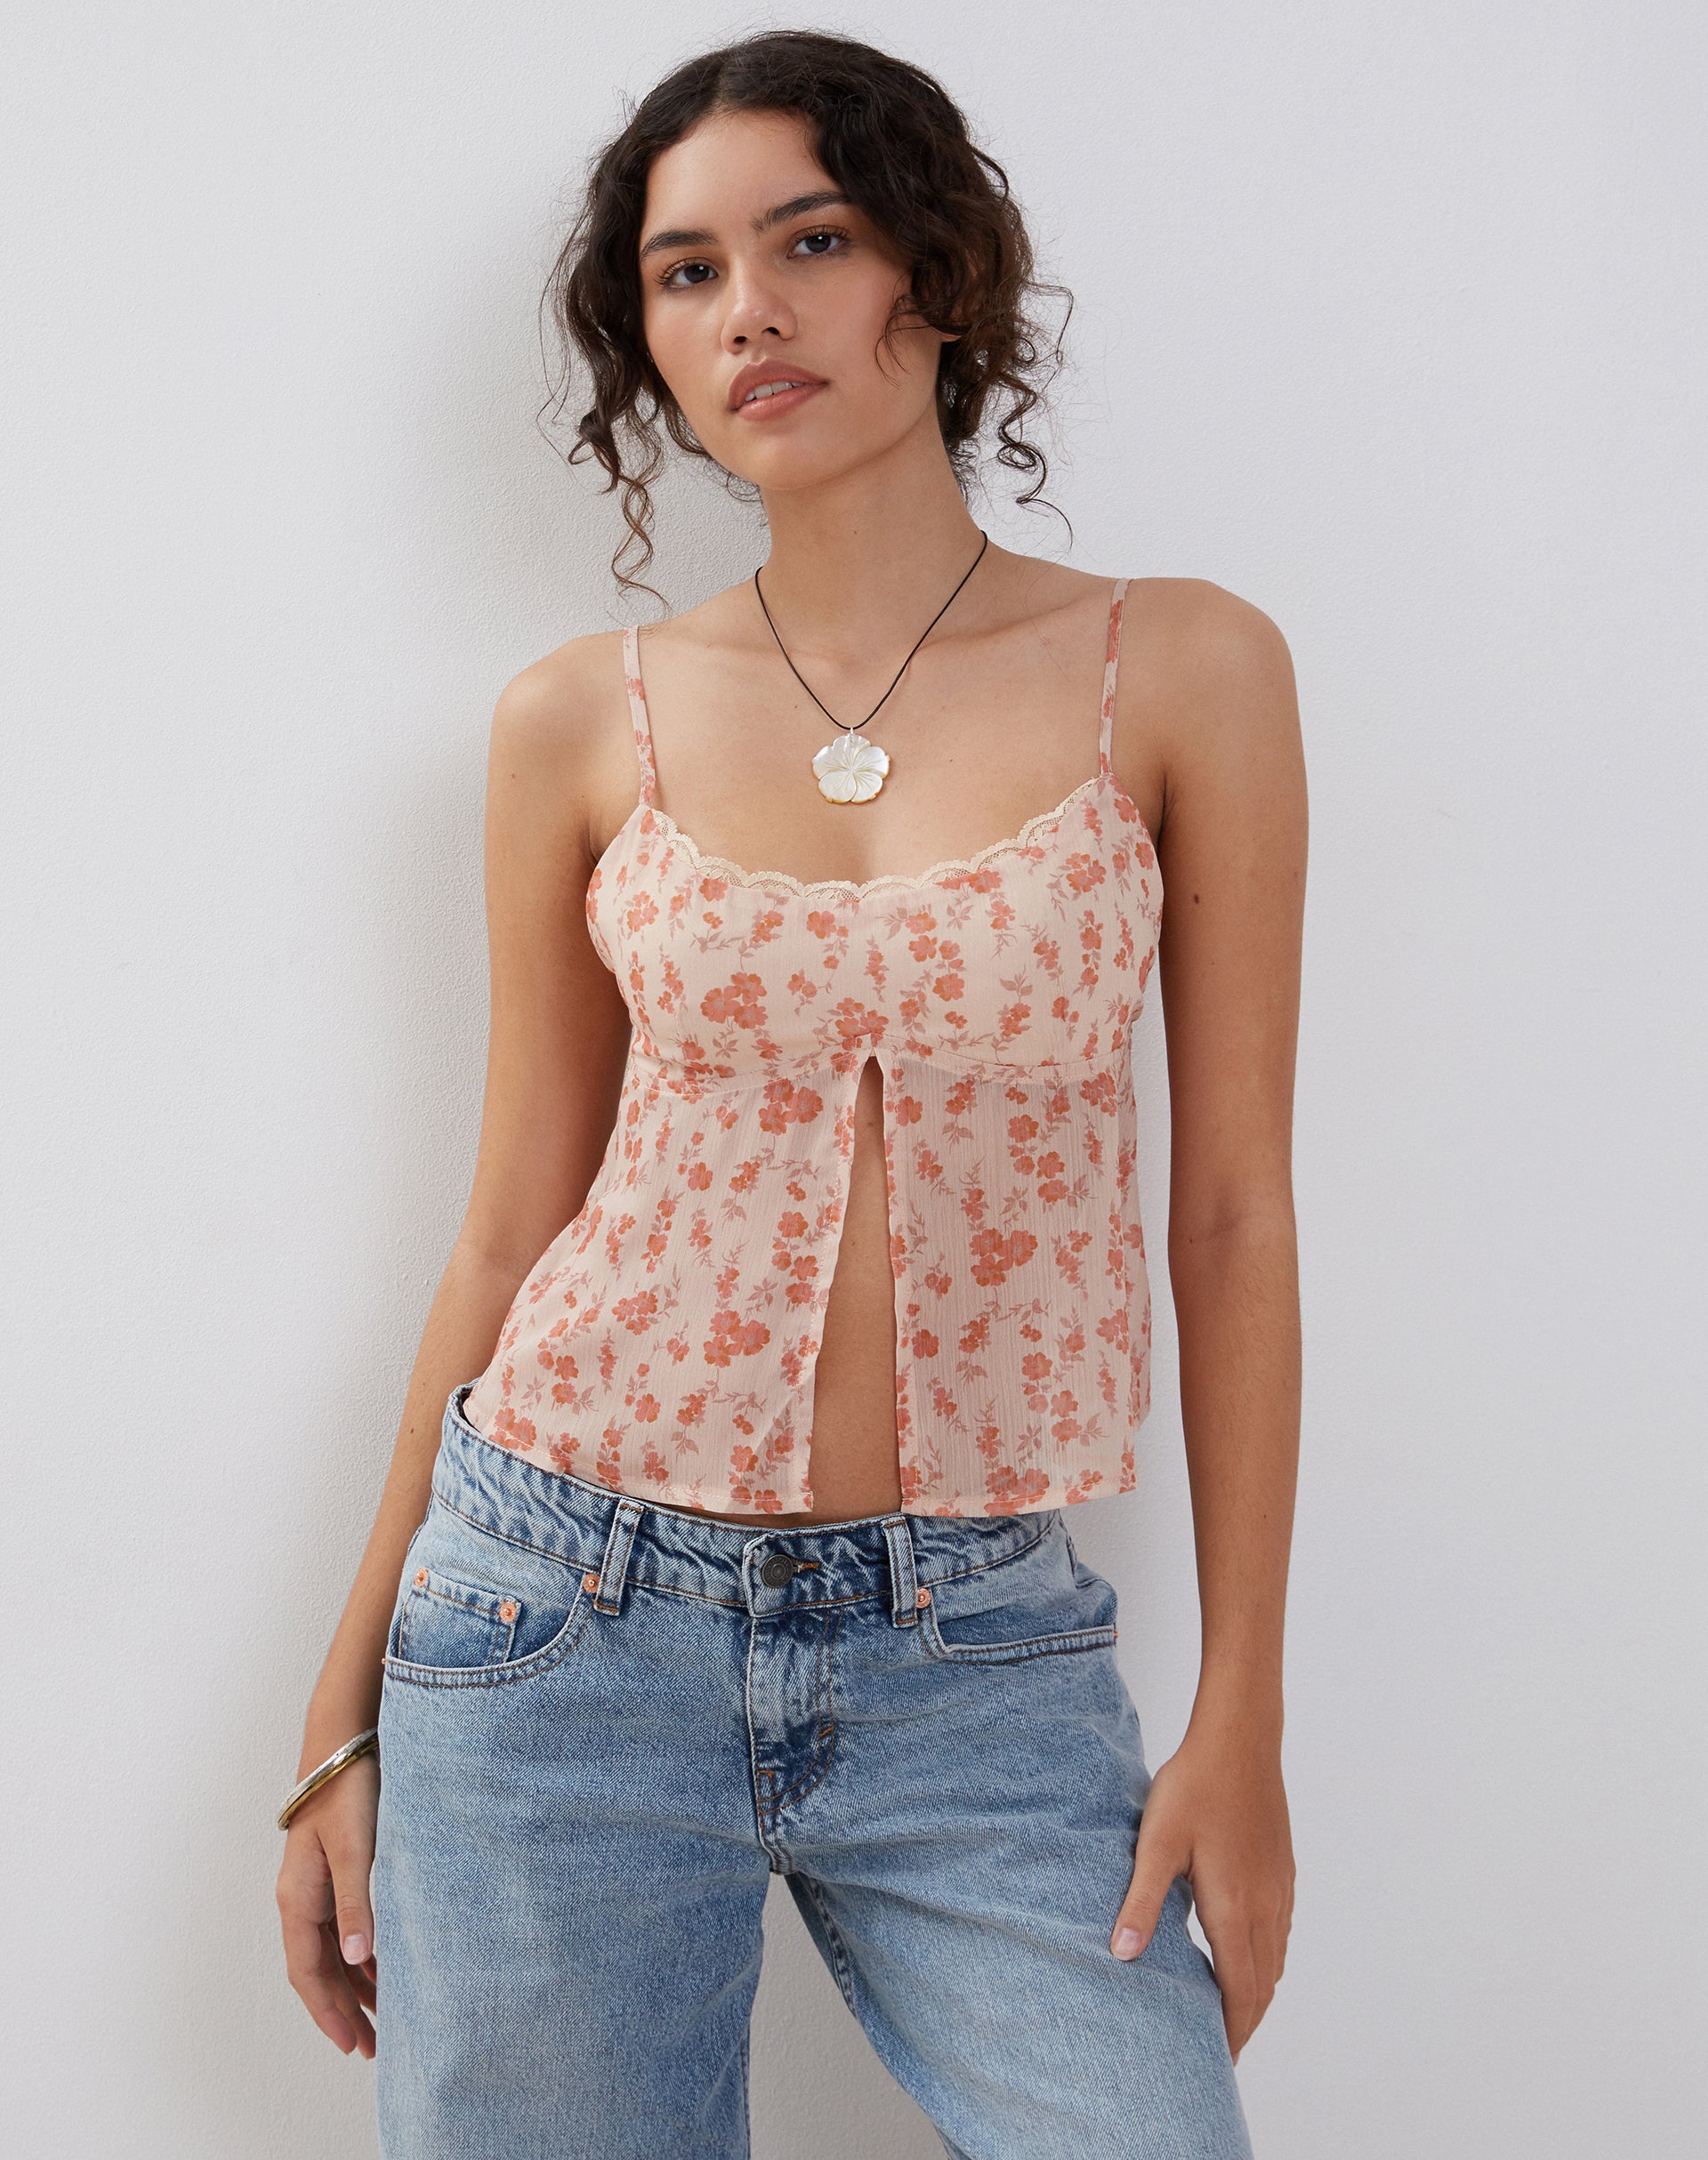 Image of Slavina Cami Butterfly Top in Peach Cherry Blossom